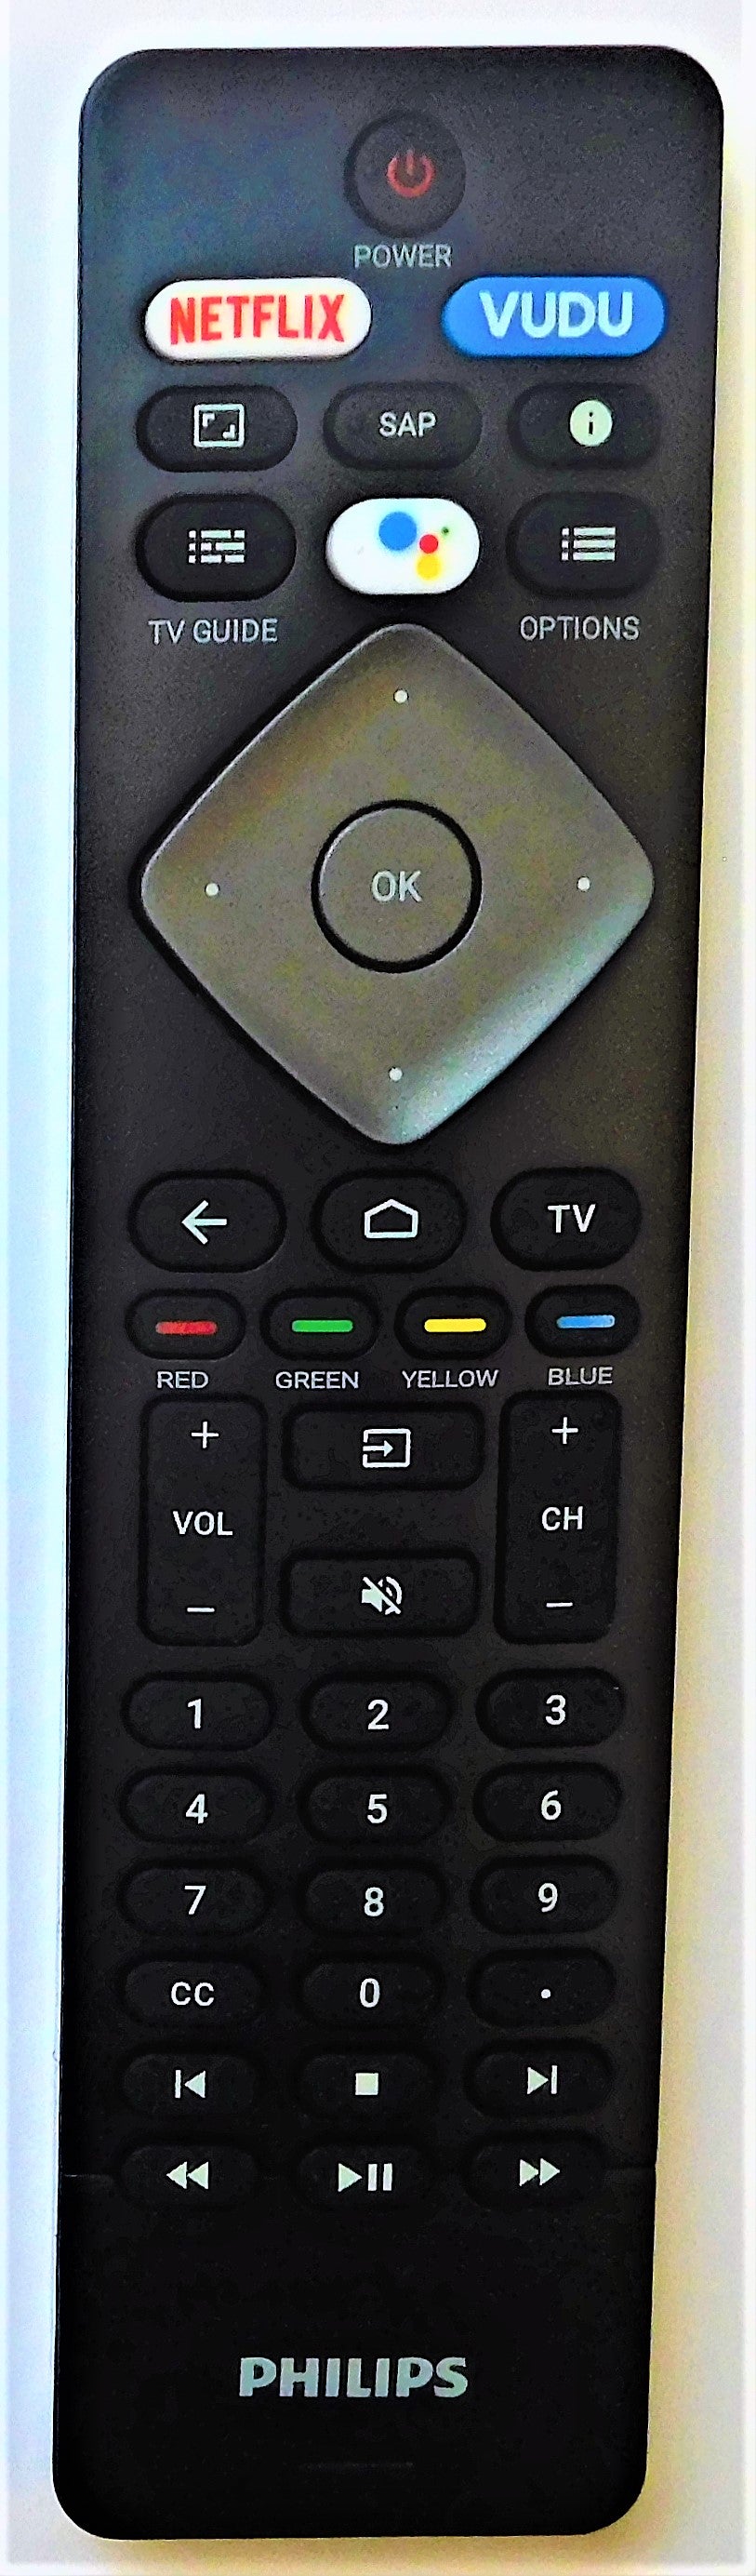  NH800UP RF402A-V14 BT800 IR Remote Control Replacement for  Philips Android 4K Ultra HD Smart LED TV 43PFL5604/F7 43PFL5766/F7  50PFL5604/F7 55PFL5604/F7 65PFL5504/F7 65PFL5604/F7(No Voice) : Electronics